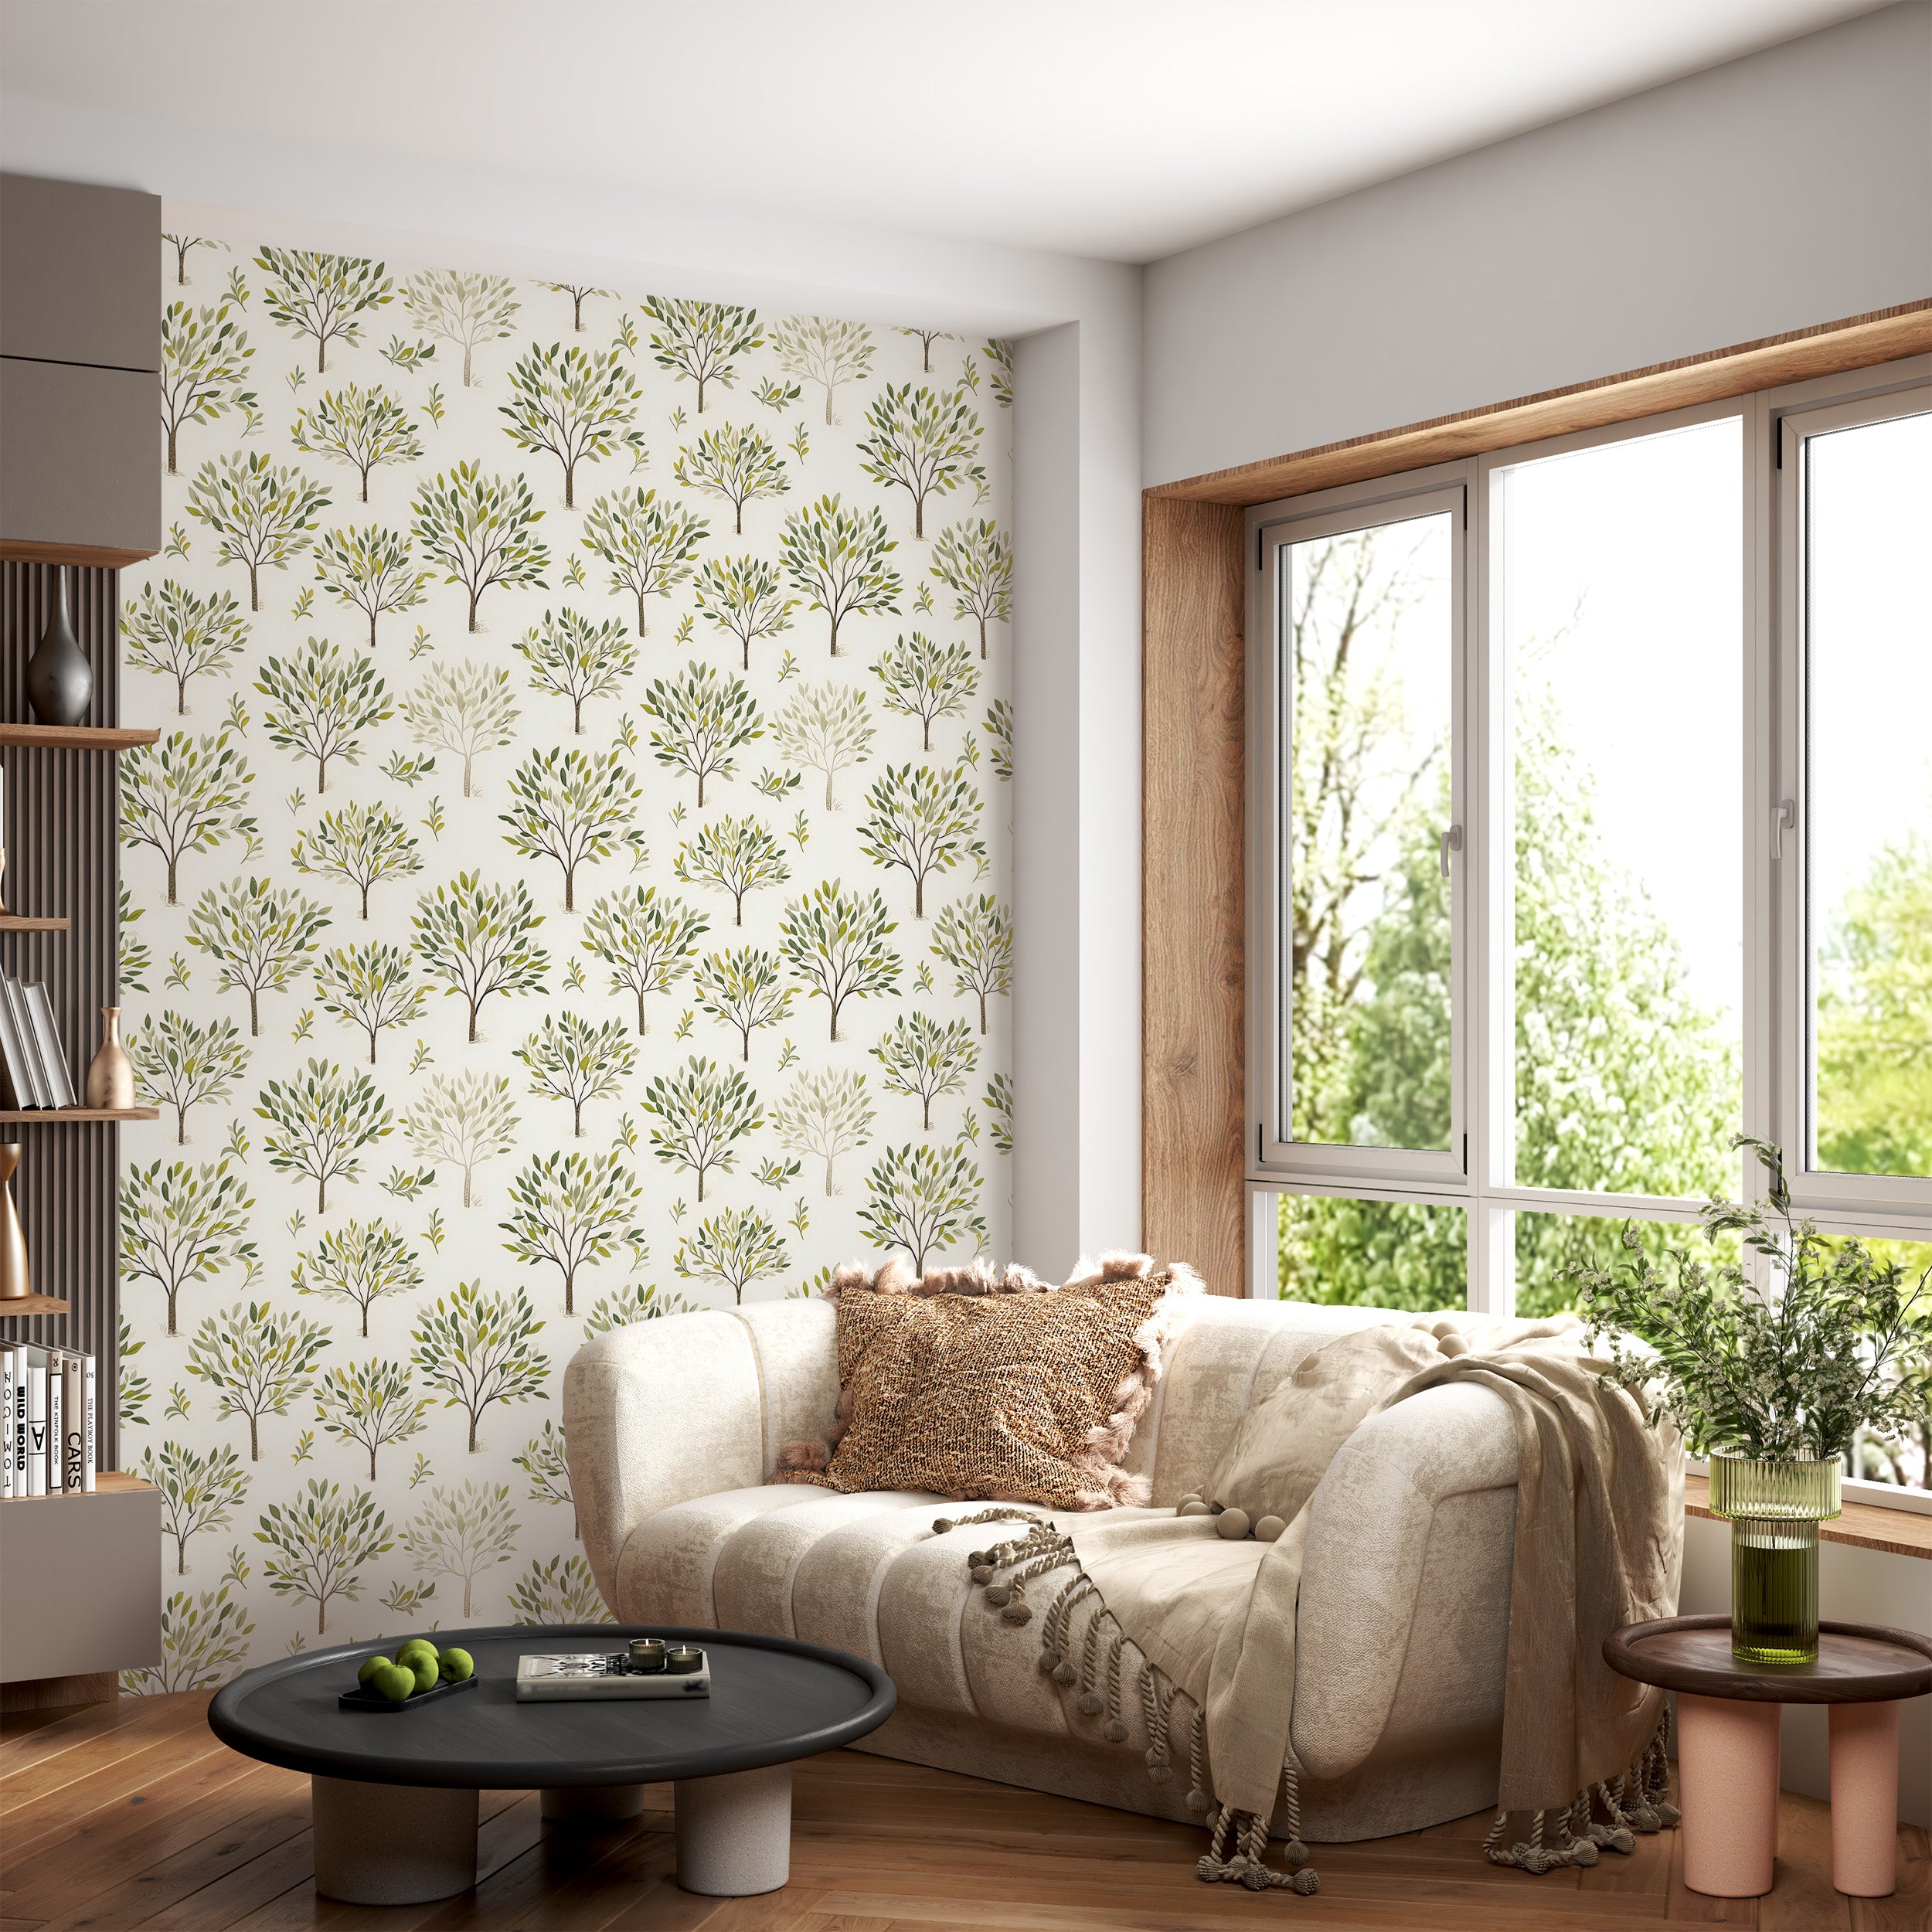 Enhance Ambiance with Removable Floral Green Wall Decal